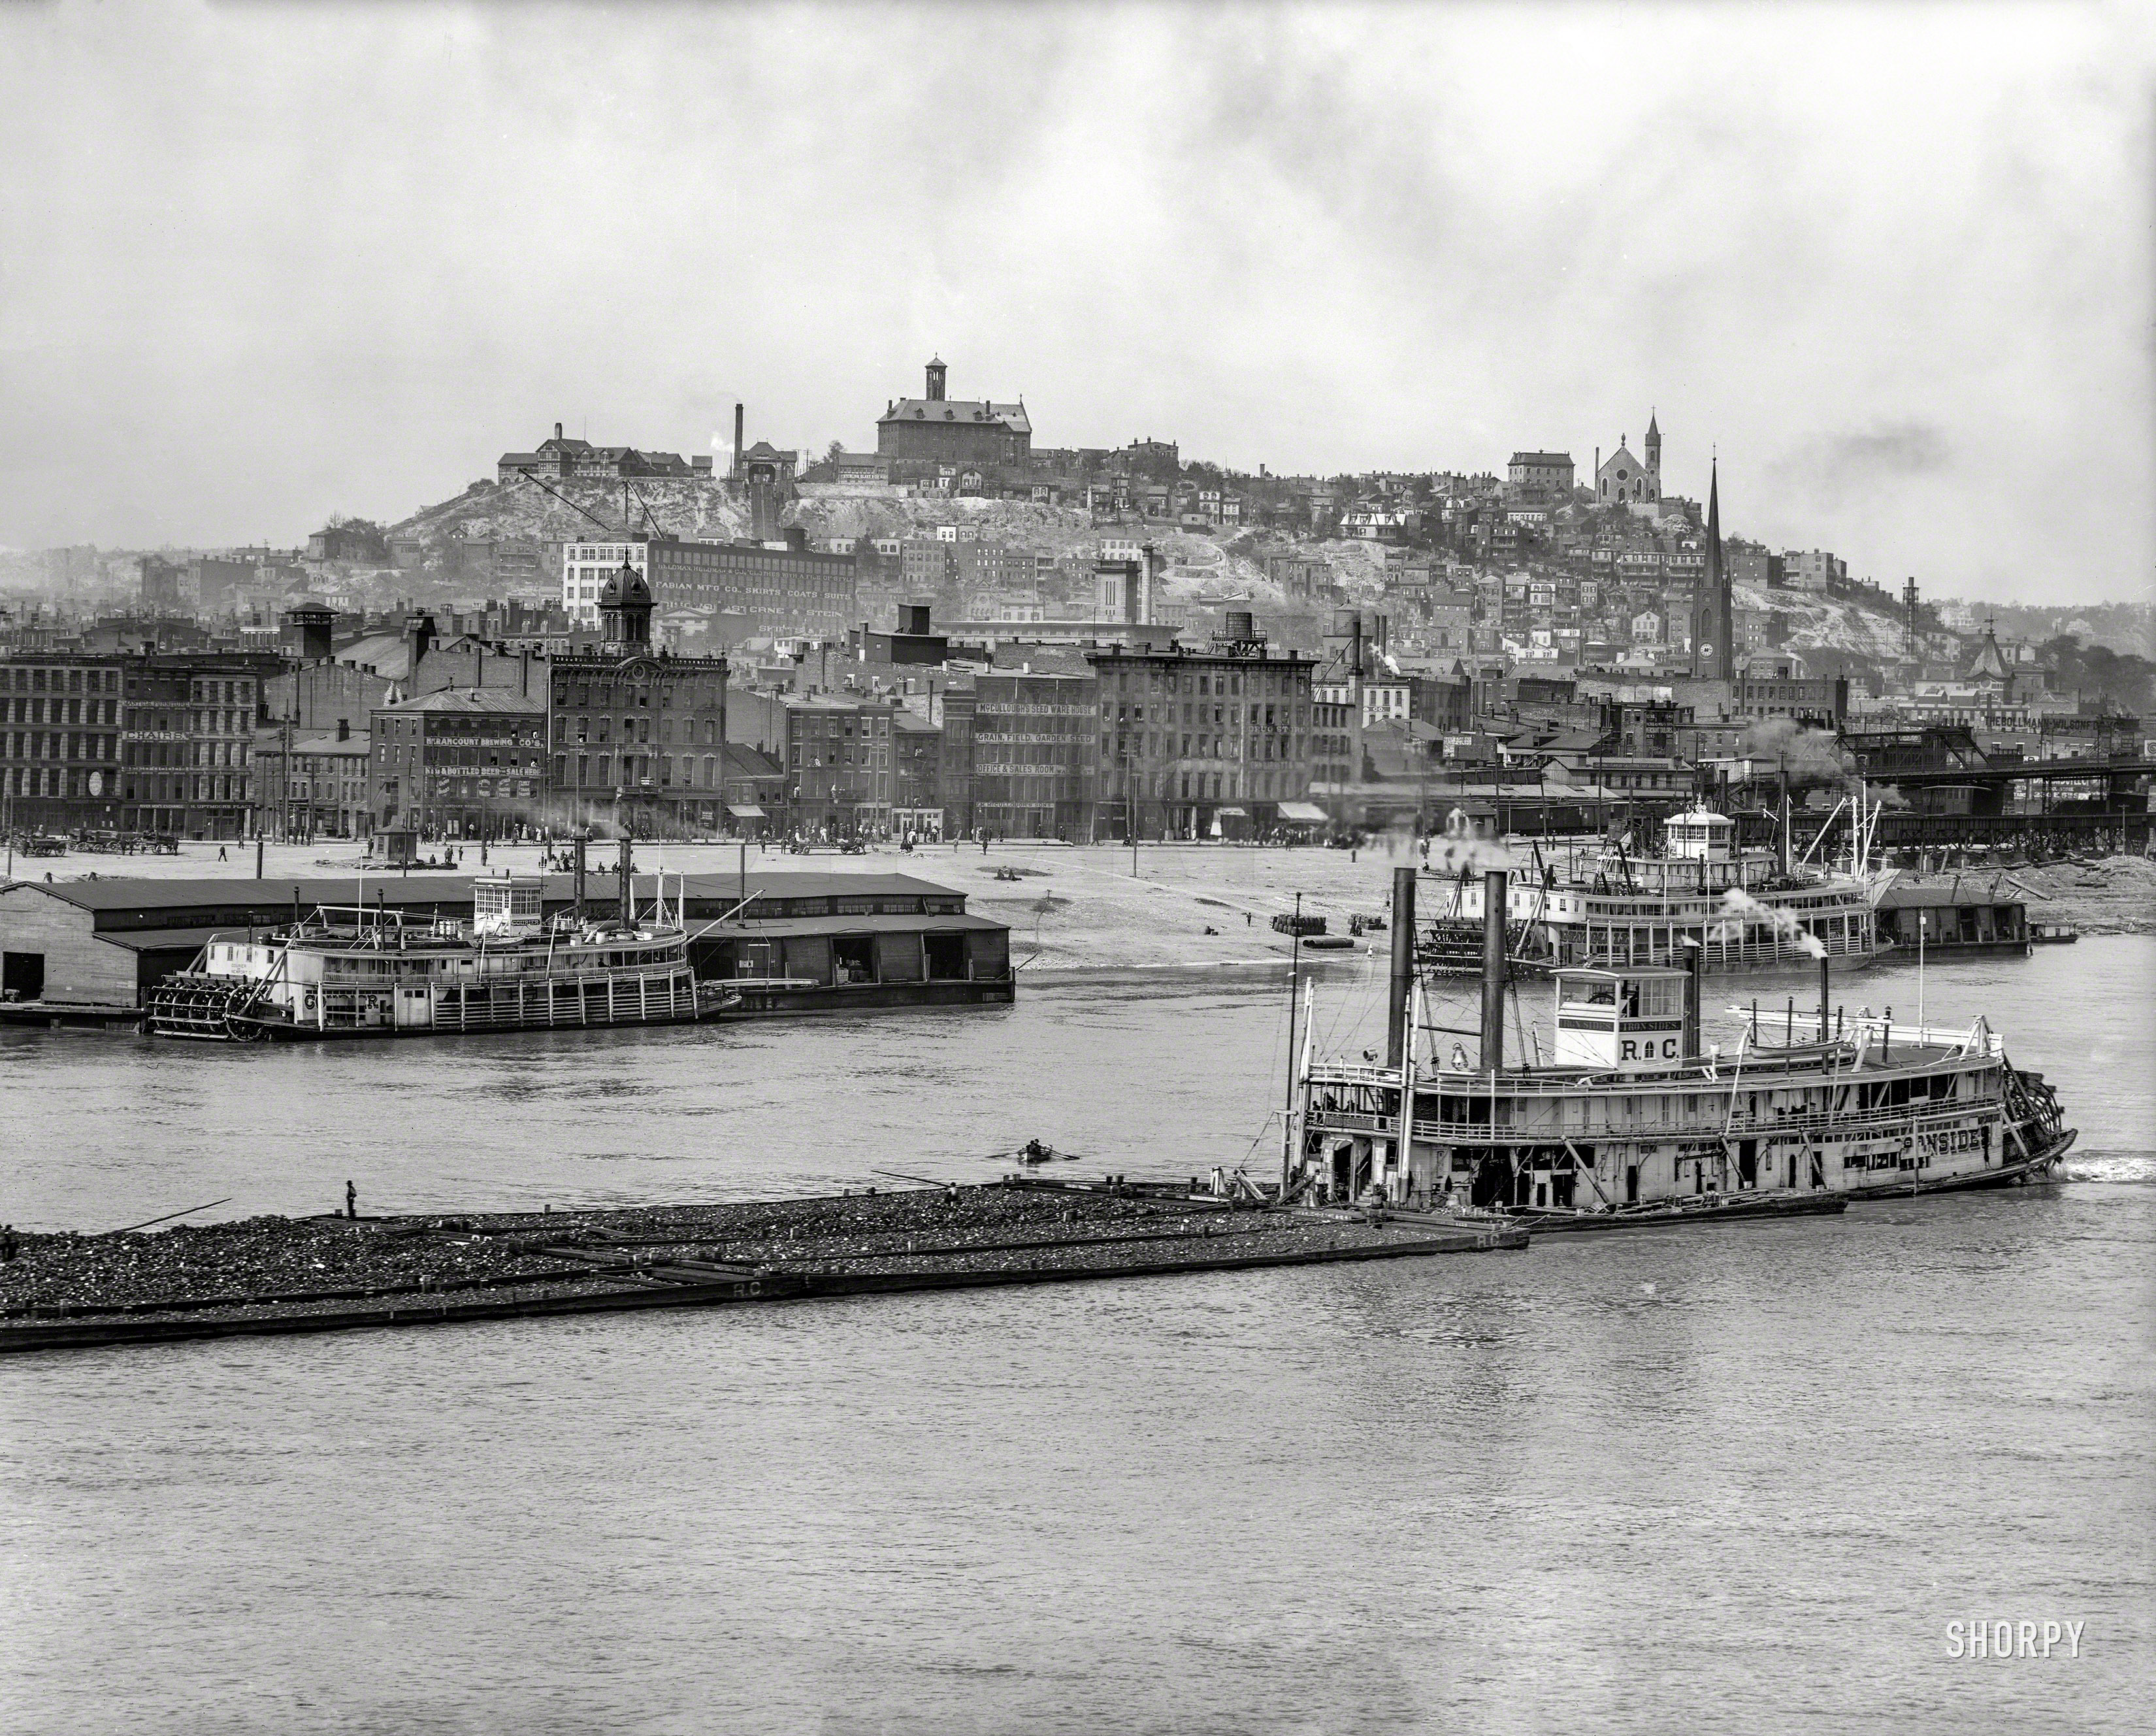 Circa 1907. "Cincinnati -- Mount Adams across Ohio River from Covington, Kentucky." With a view of the sternwheeler Iron Sides pushing a coal barge. 8x10 inch dry plate glass negative, Detroit Publishing Company. View full size.